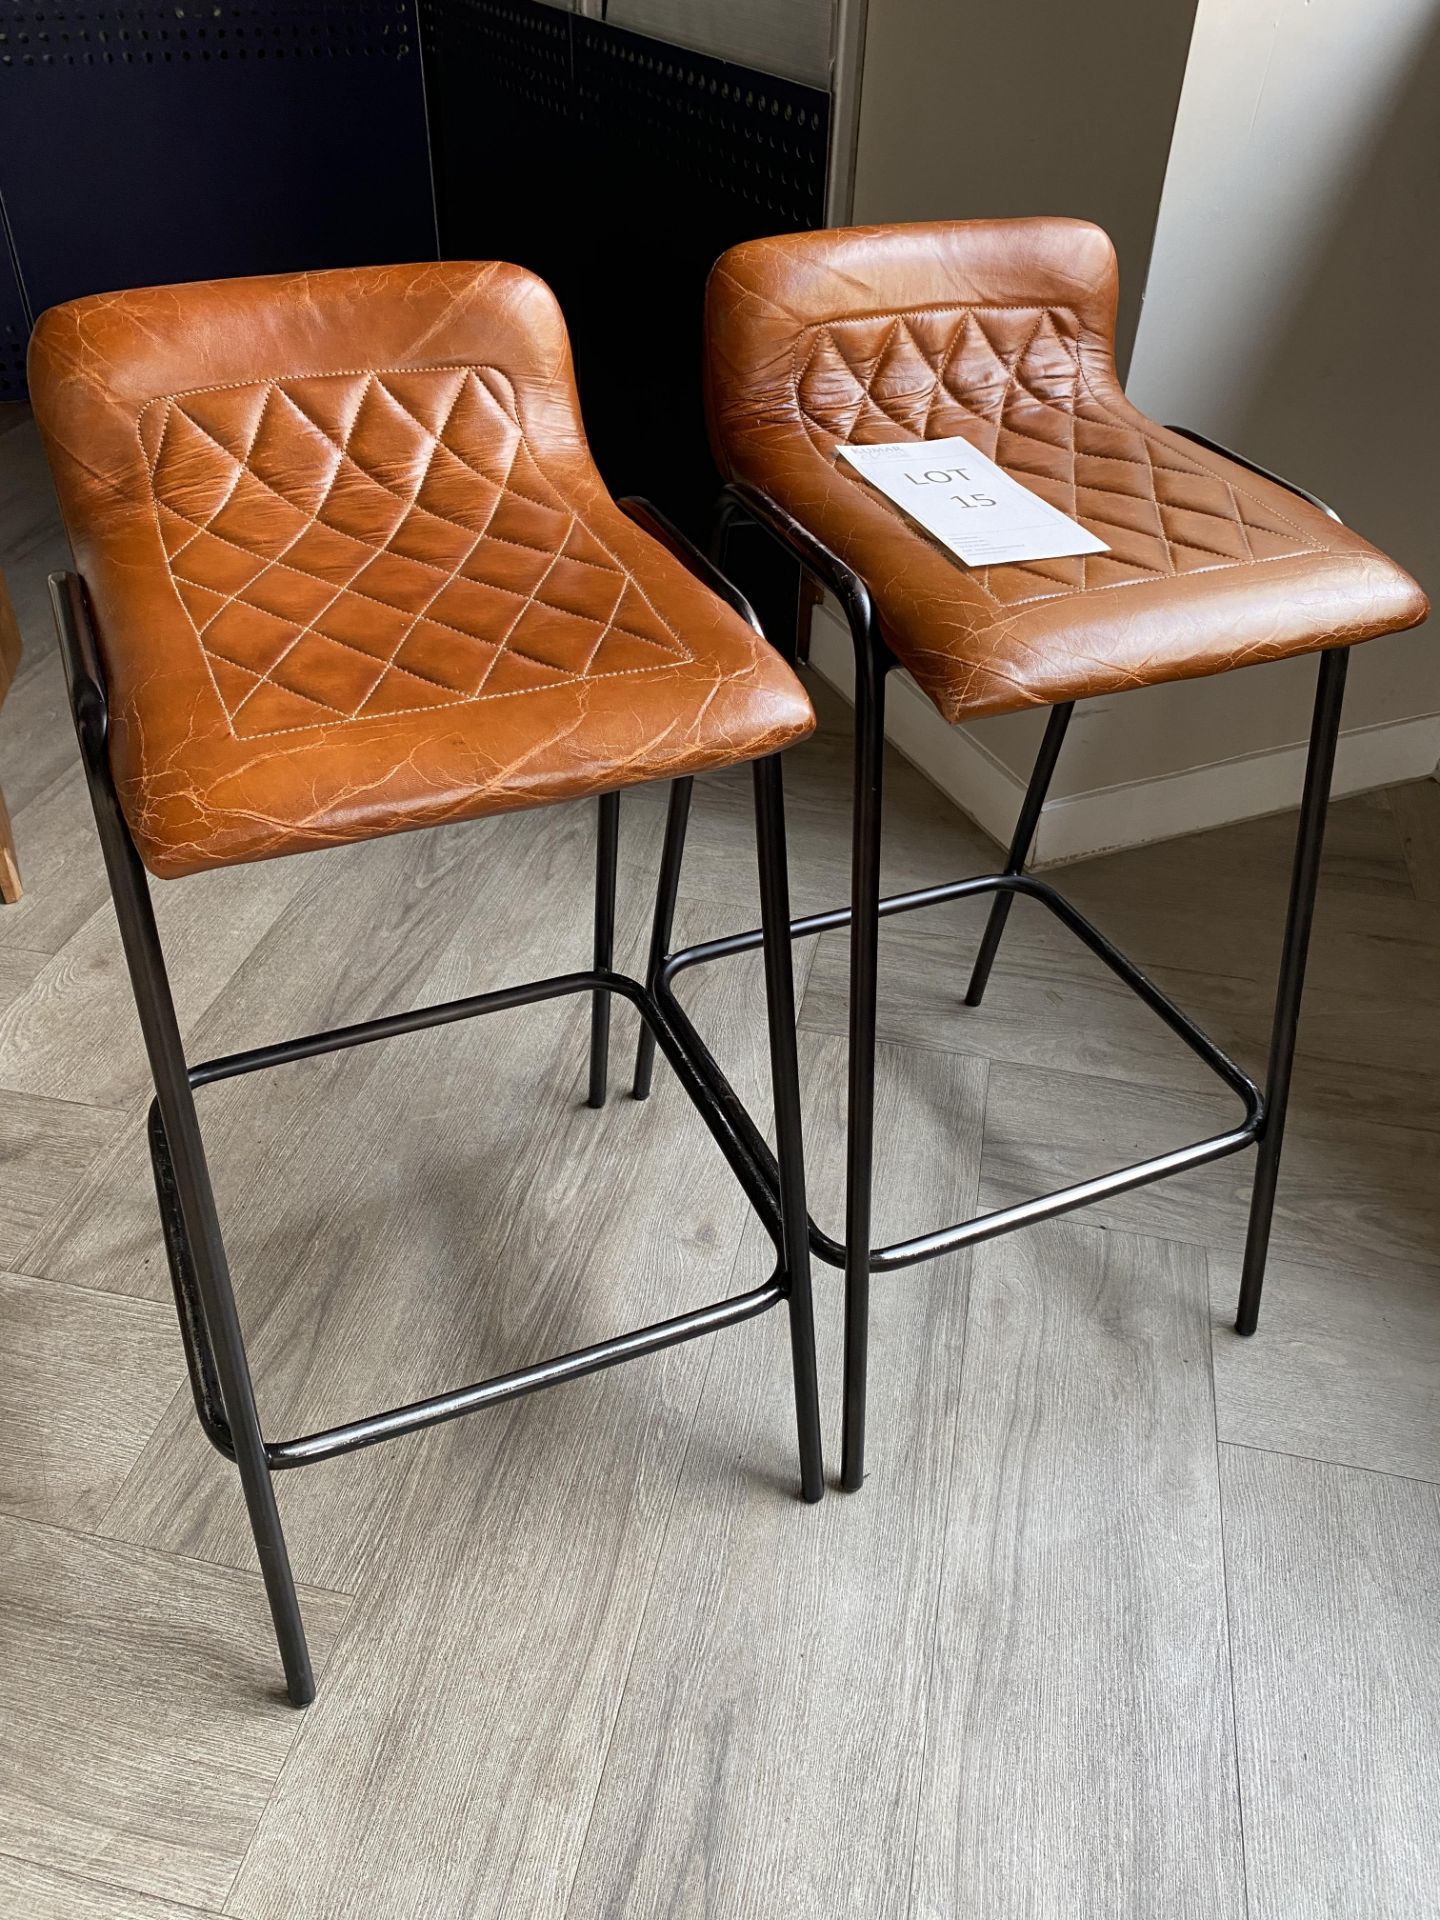 2x Leather Upholstered Bar Stools - New Cost £120 per stool